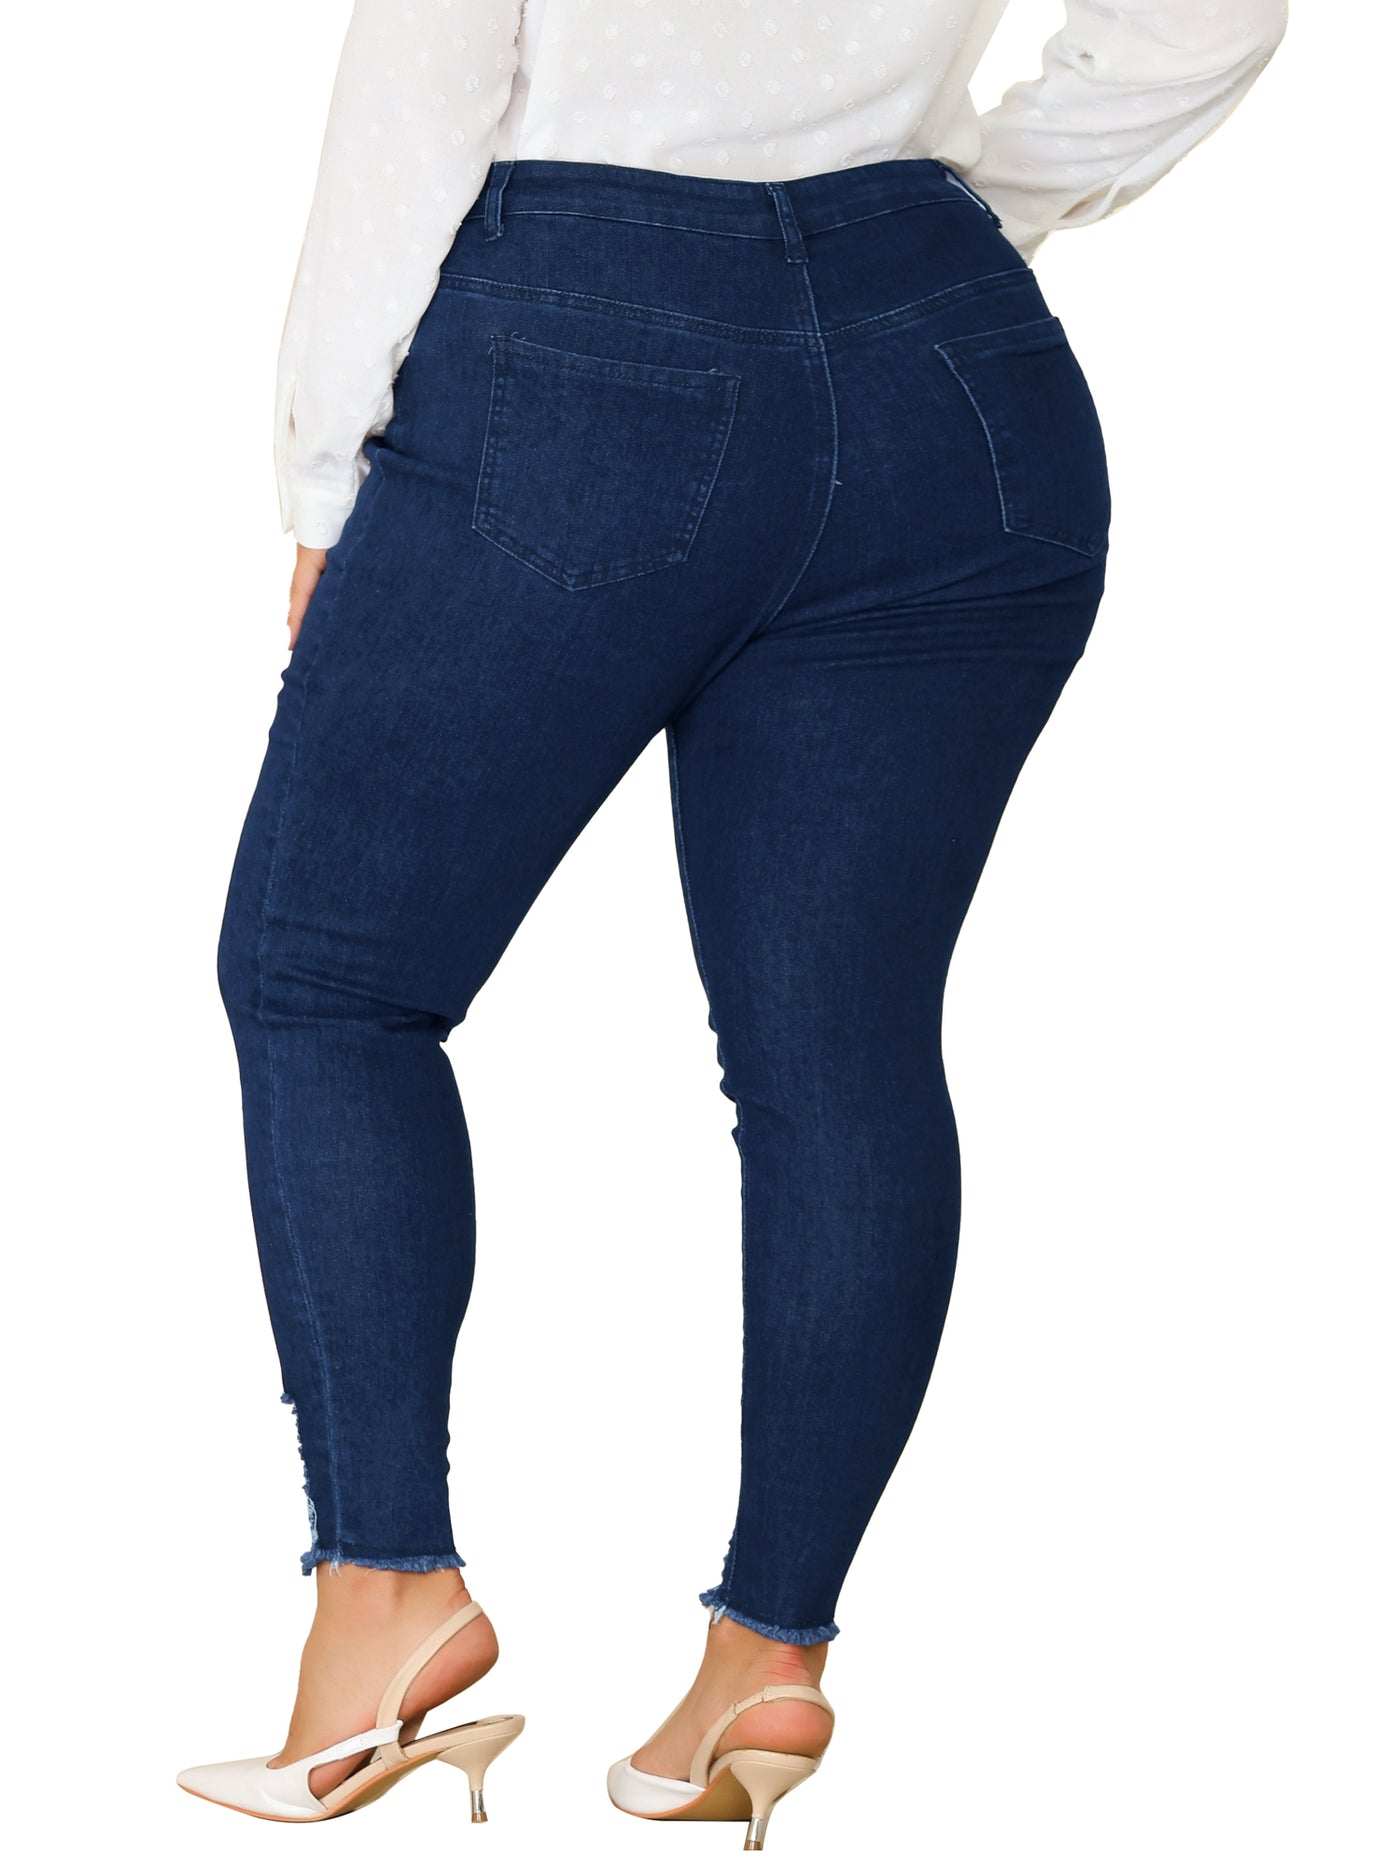 Bublédon Plus Size Denim Jean for Women Ripped Mid Rise Stretch Washed Skinny Jeans